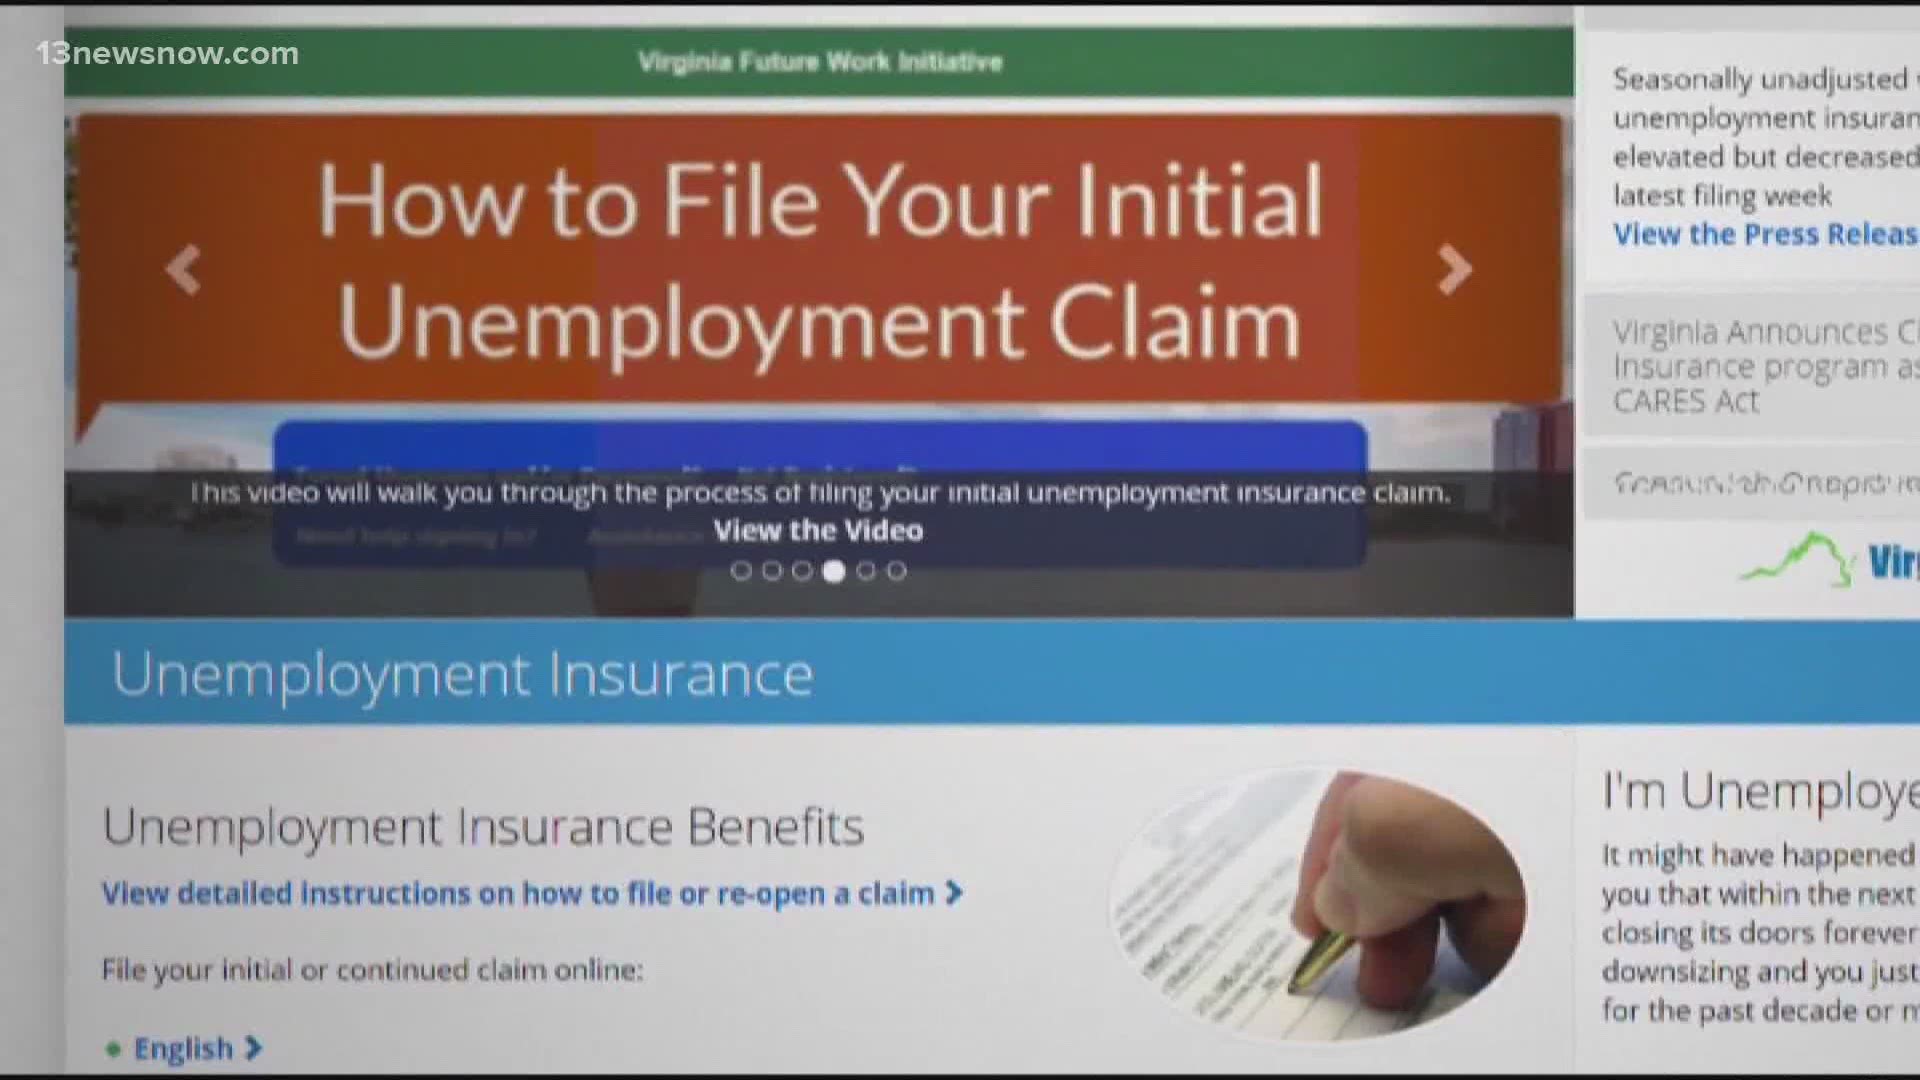 13News Now Evan Watson explains the delay of the unemployment extension program, which has caused many issues for recipients of state unemployment benefits.